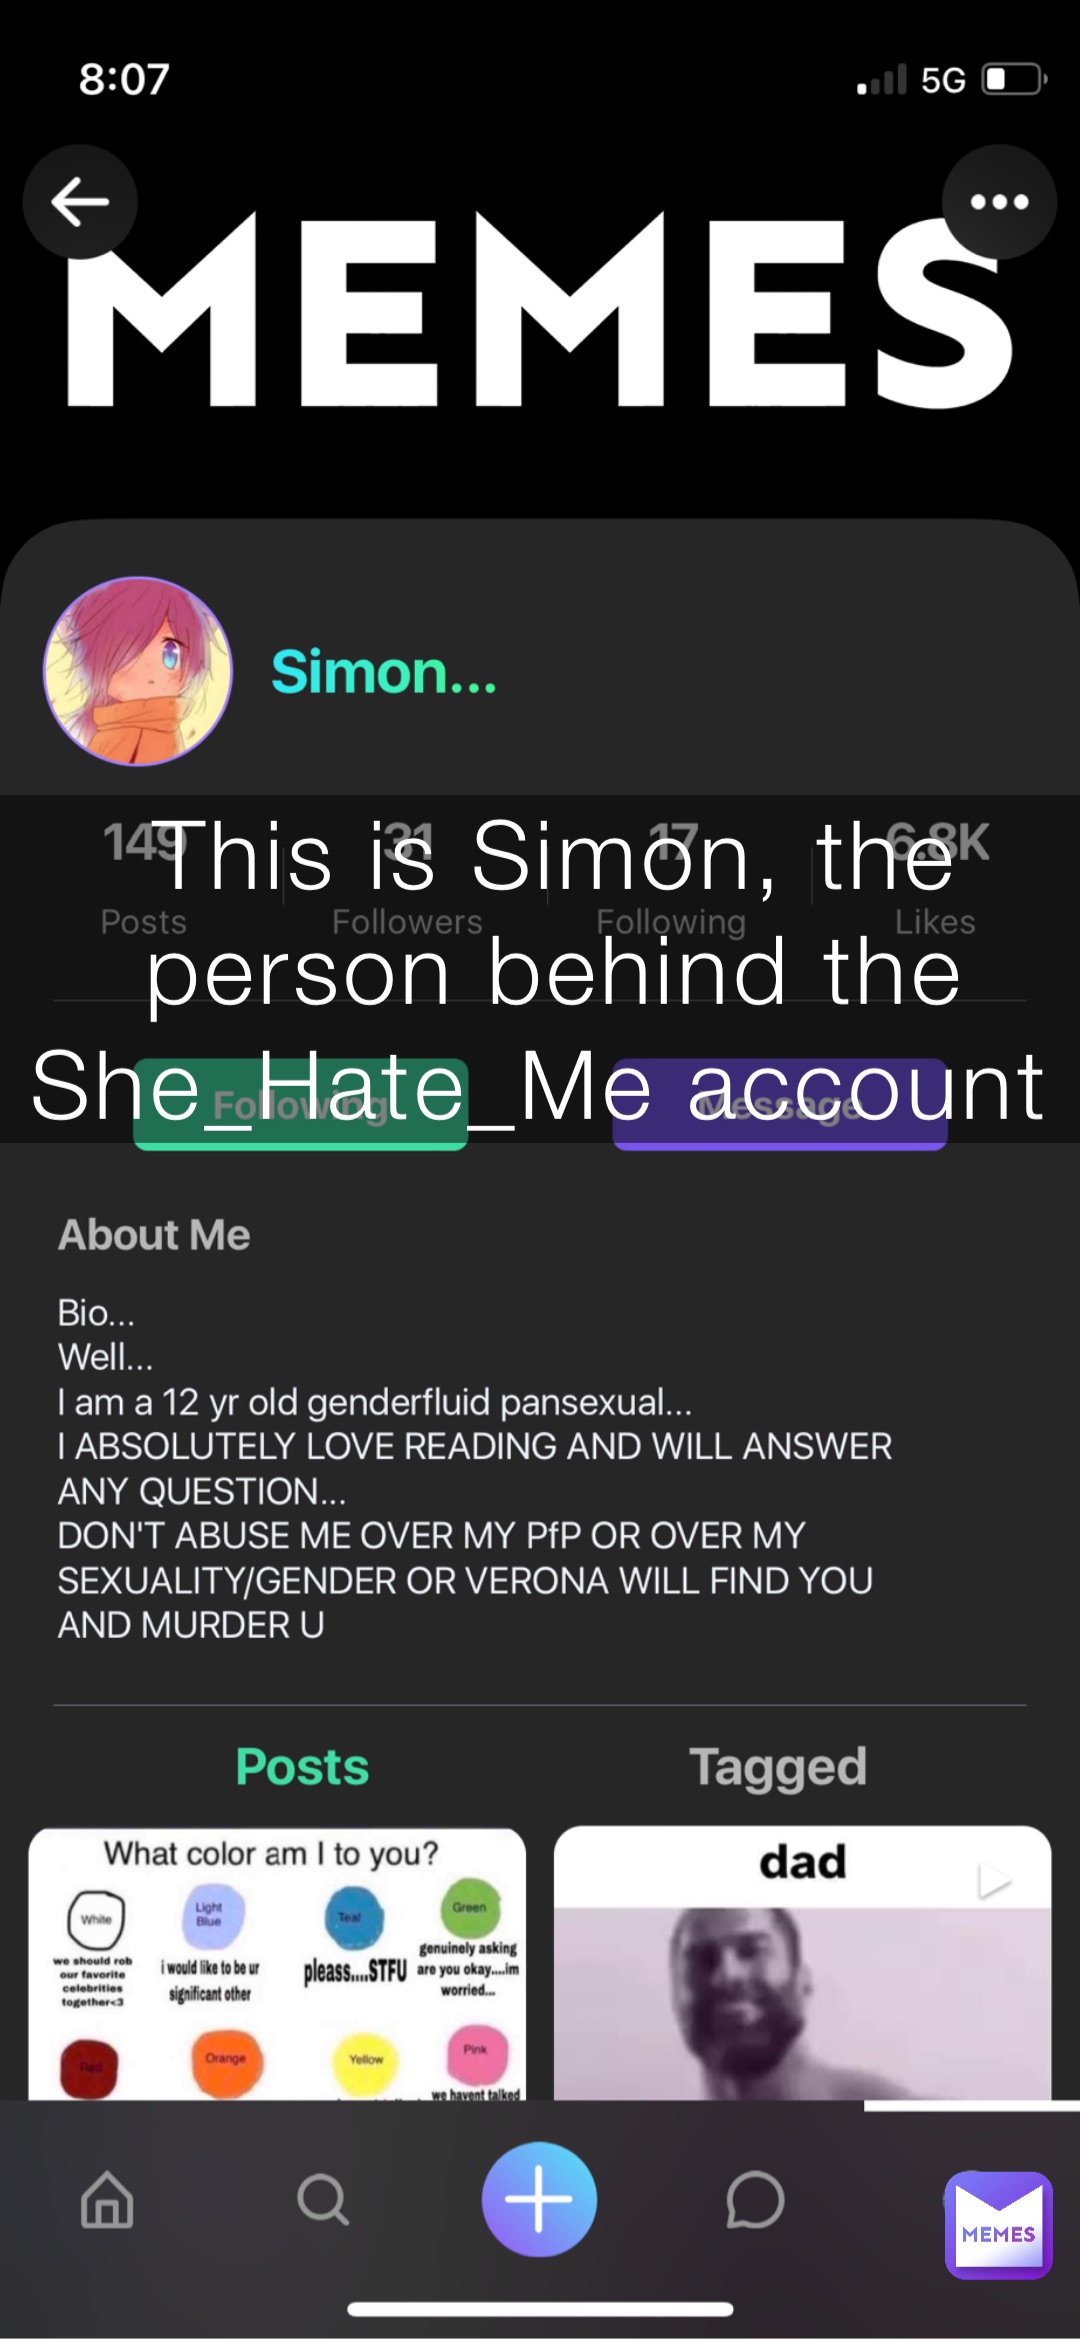 This is Simon, the person behind the She_Hate_Me account